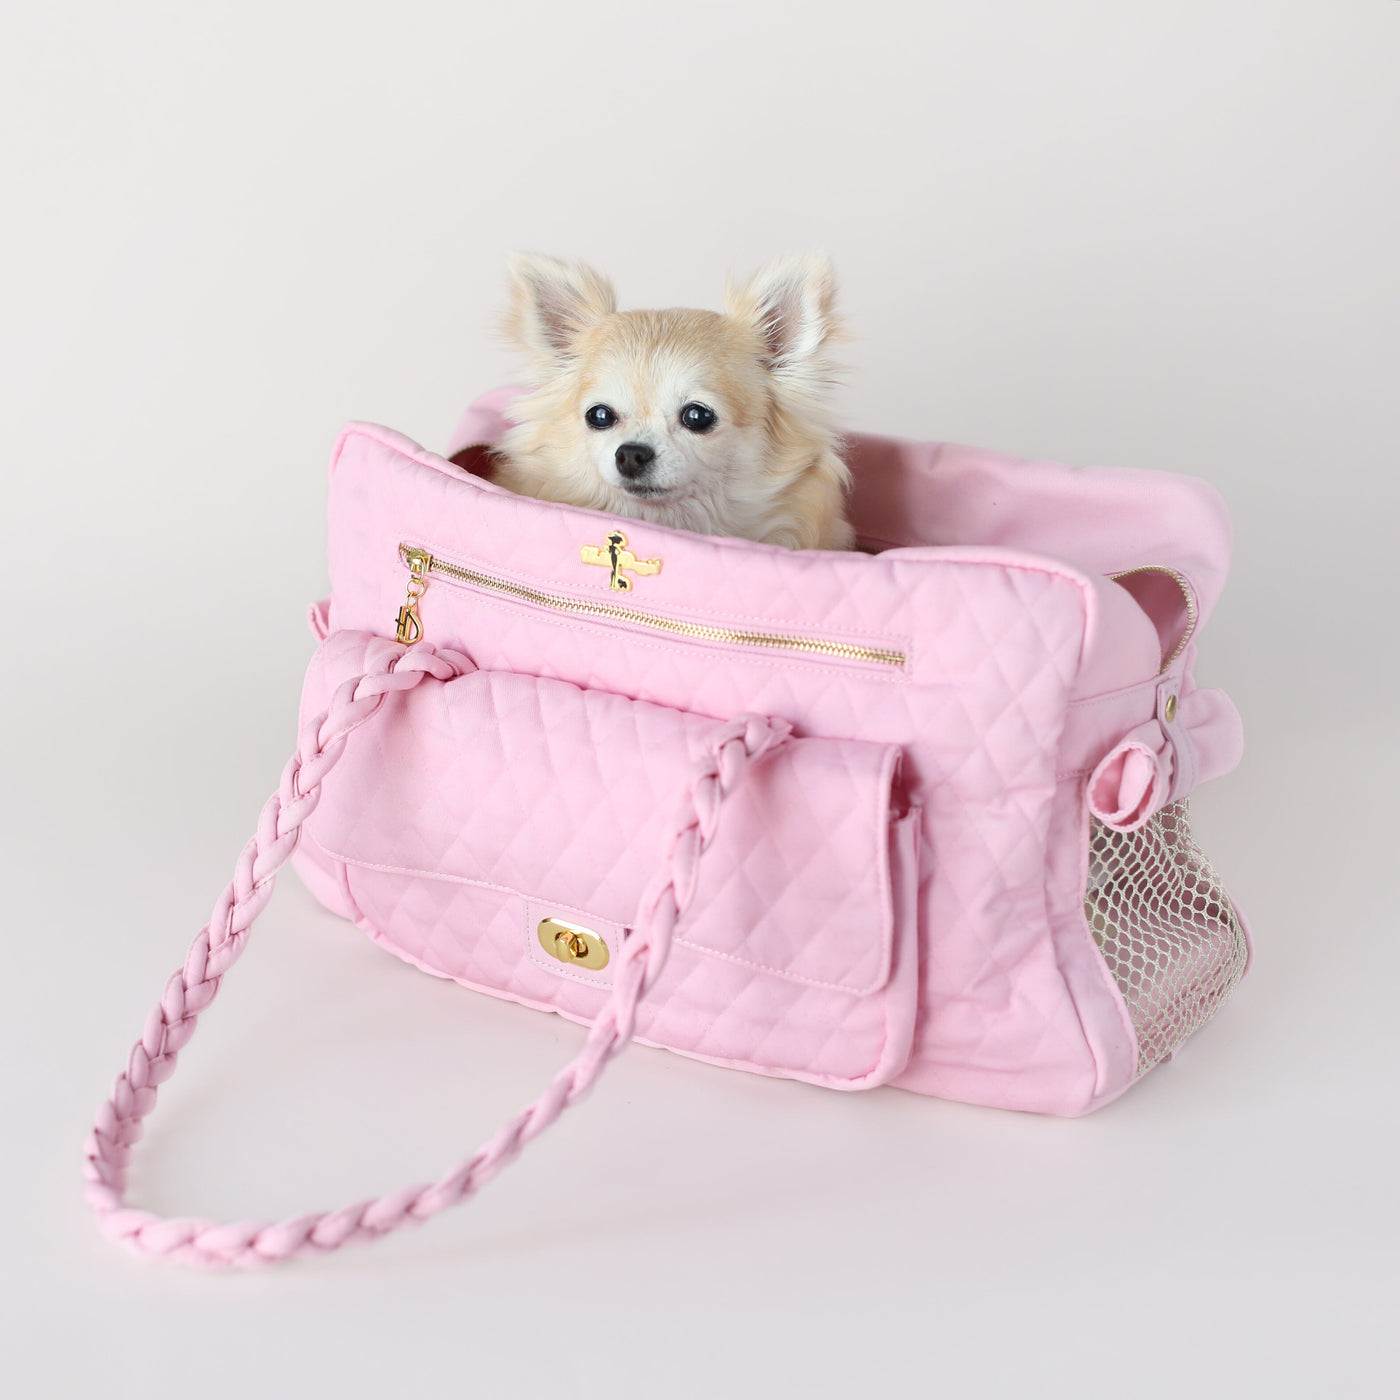 Luxury Pet Carrier | The Porsha dog carrier is the perfect carrier for you and your baby! This luxury carrier includes meshing on both sides, YKK zippers, and plenty of storage space in the front pocket for all your necessities and accessories. Travel in style with our luxury carrier! | Chloe Cole Pet Couture |  Large- 17.5" x 7" x 10" | Holds dogs up to 8 Lbs